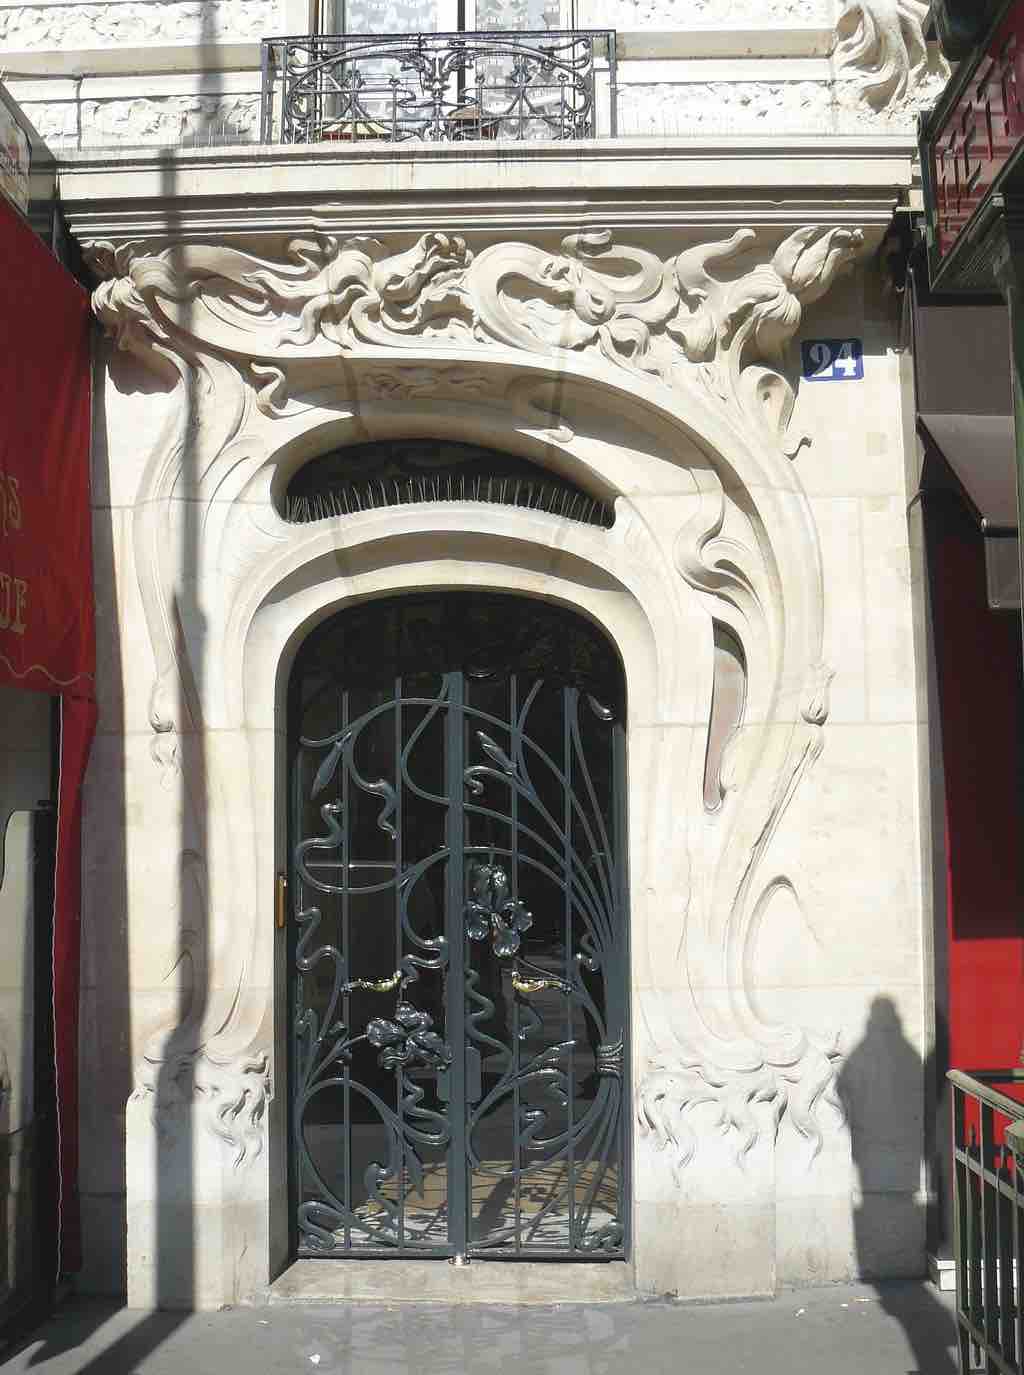 The doorway at place Etienne Pernet, 24 (Paris 15e), 1905  by Alfred Wagon, architect.